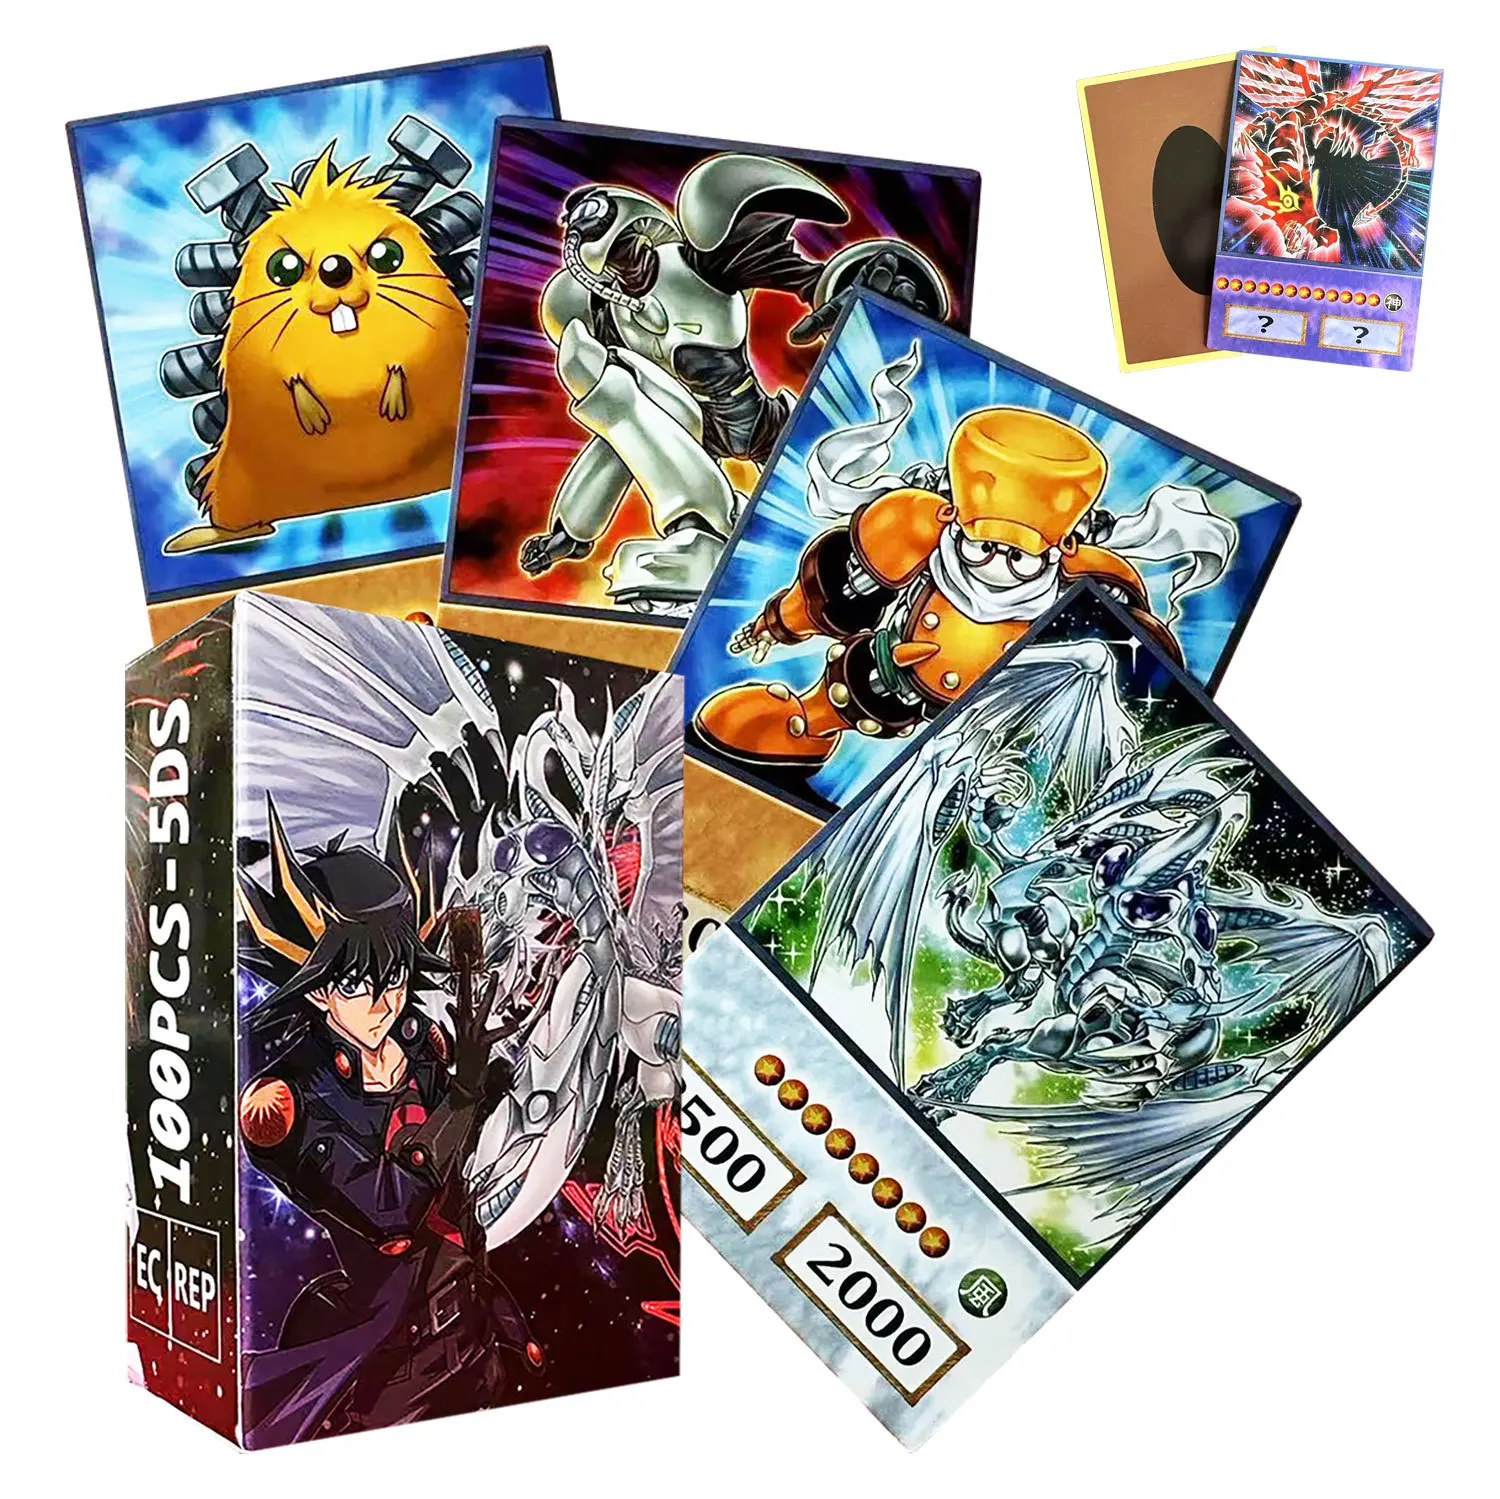 

100pcs Mazaki Anzu English Anime Card AIBO Yugi Muto Party Games Collect Hobby Cards Toys for Boys Christmas Holiday Gifts